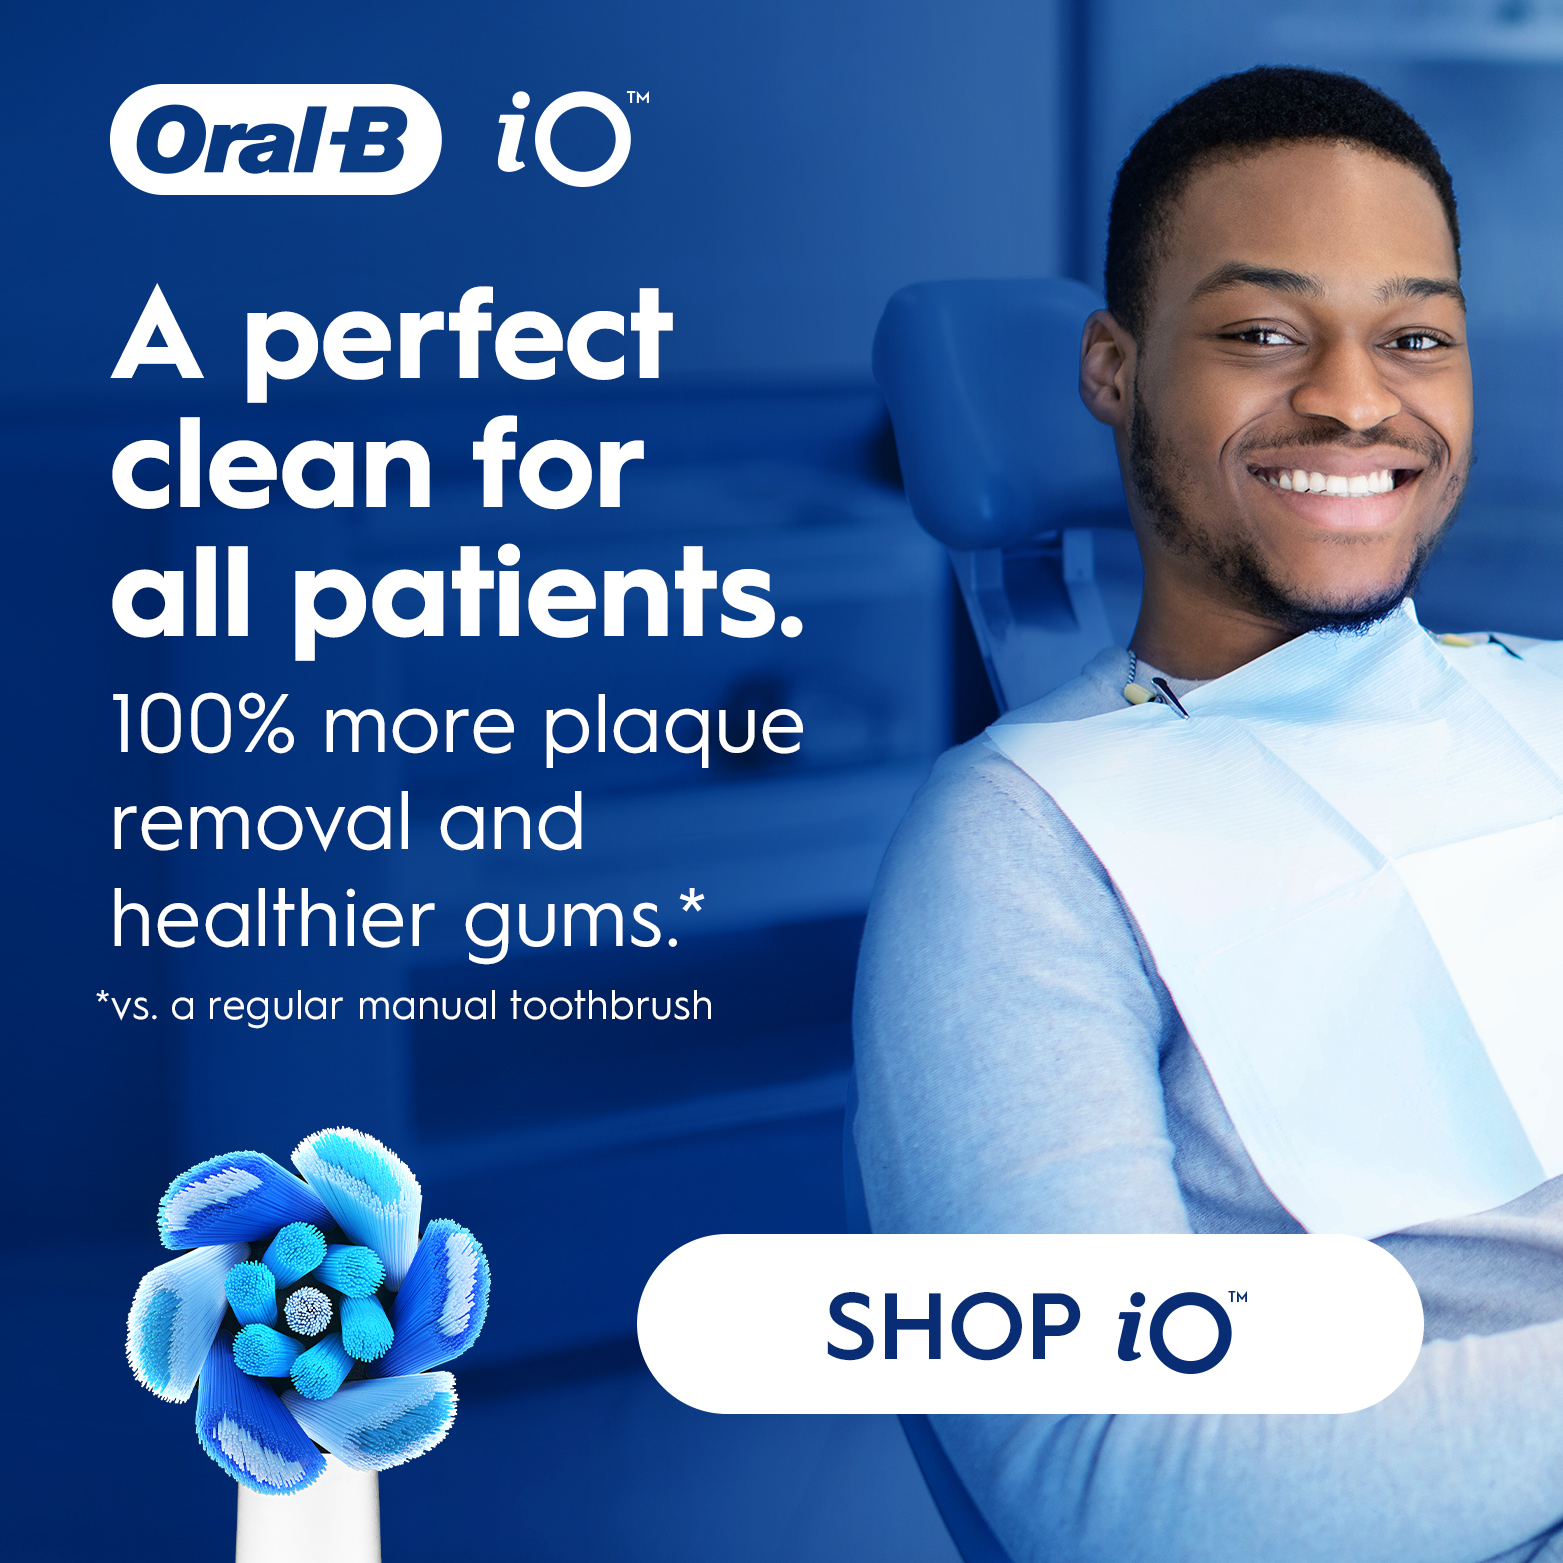 Transform your patients' gum health at home with Oral-B iO